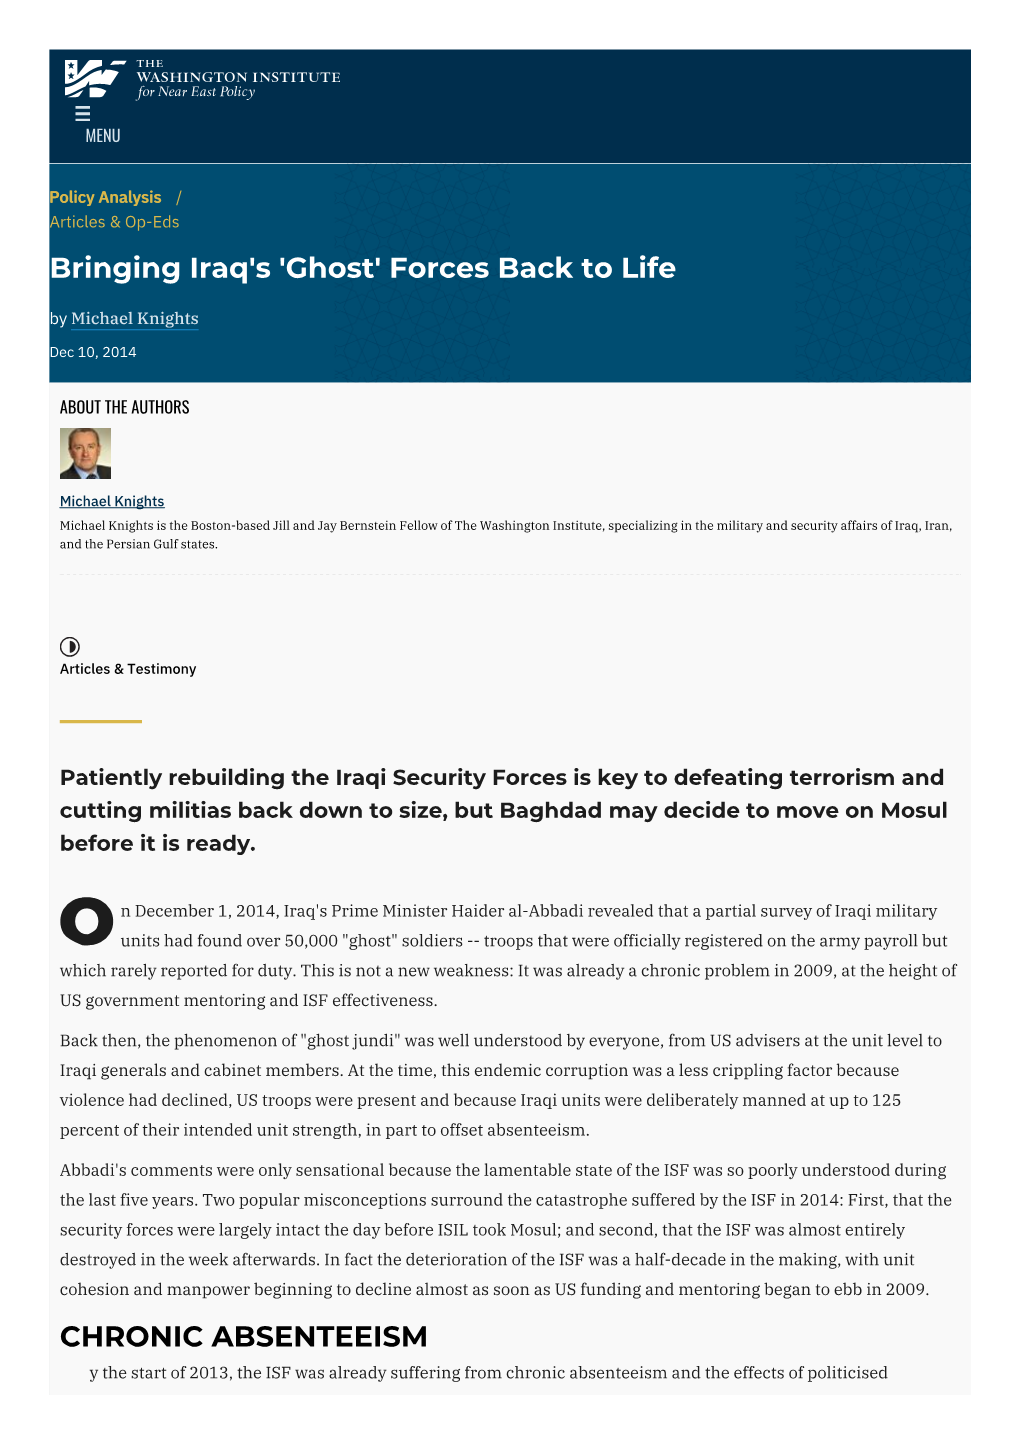 Bringing Iraq's 'Ghost' Forces Back to Life | the Washington Institute